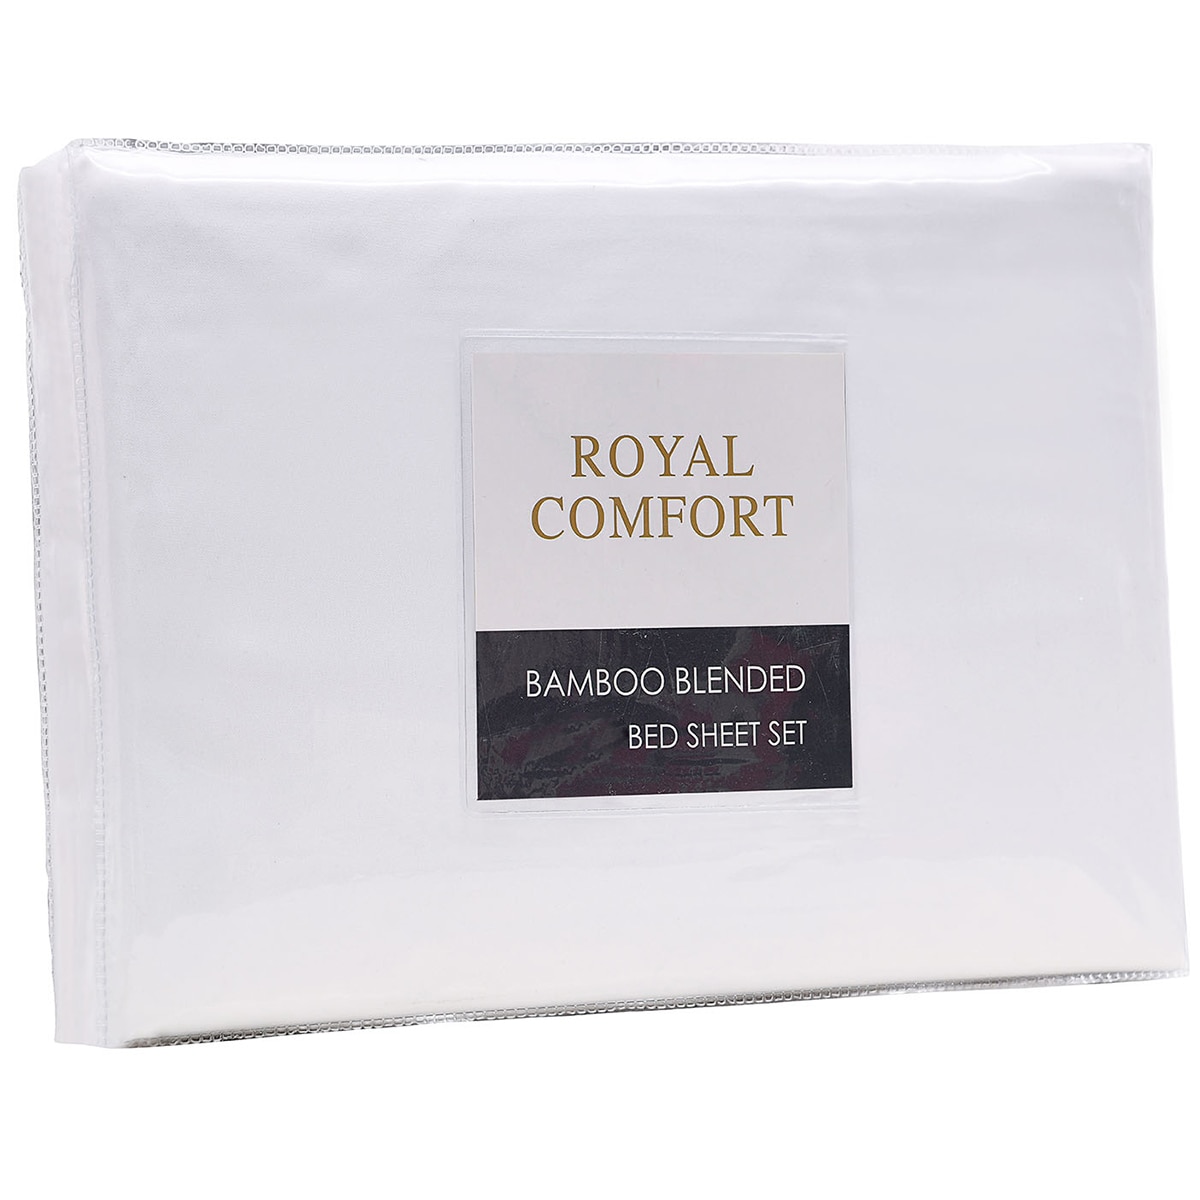 Bdirect Royal Comfort Blended Bamboo Sheet Set Queen - White